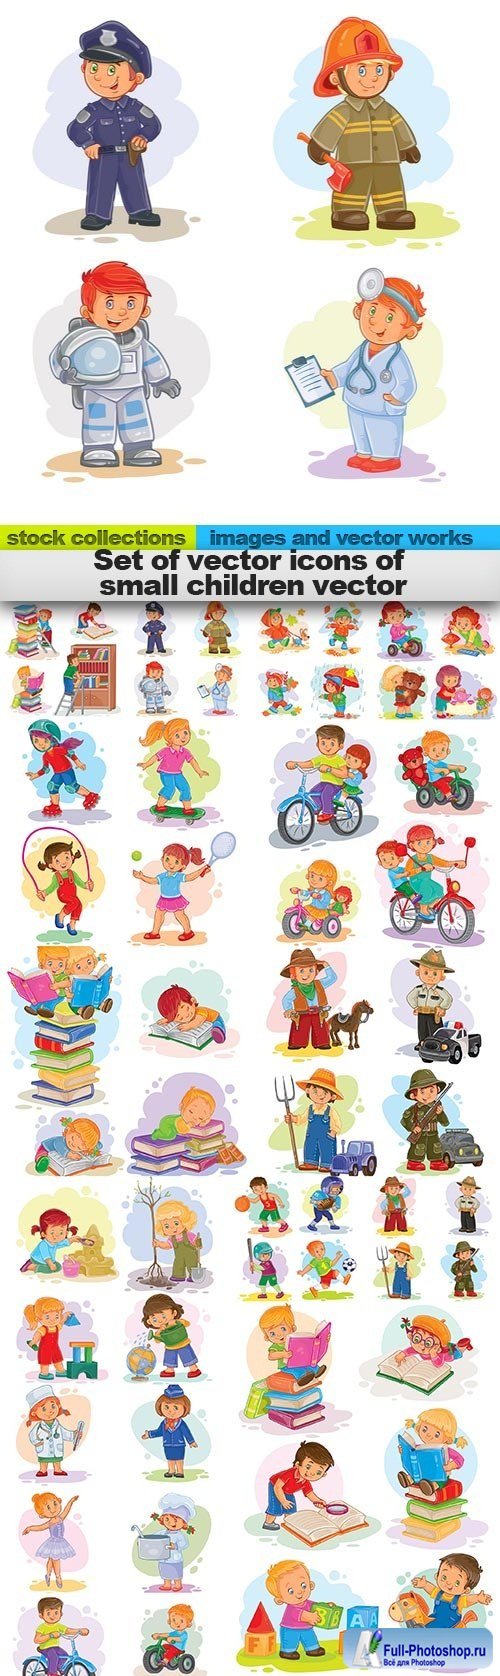 Set of vector icons of small children vector, 15 x EPS